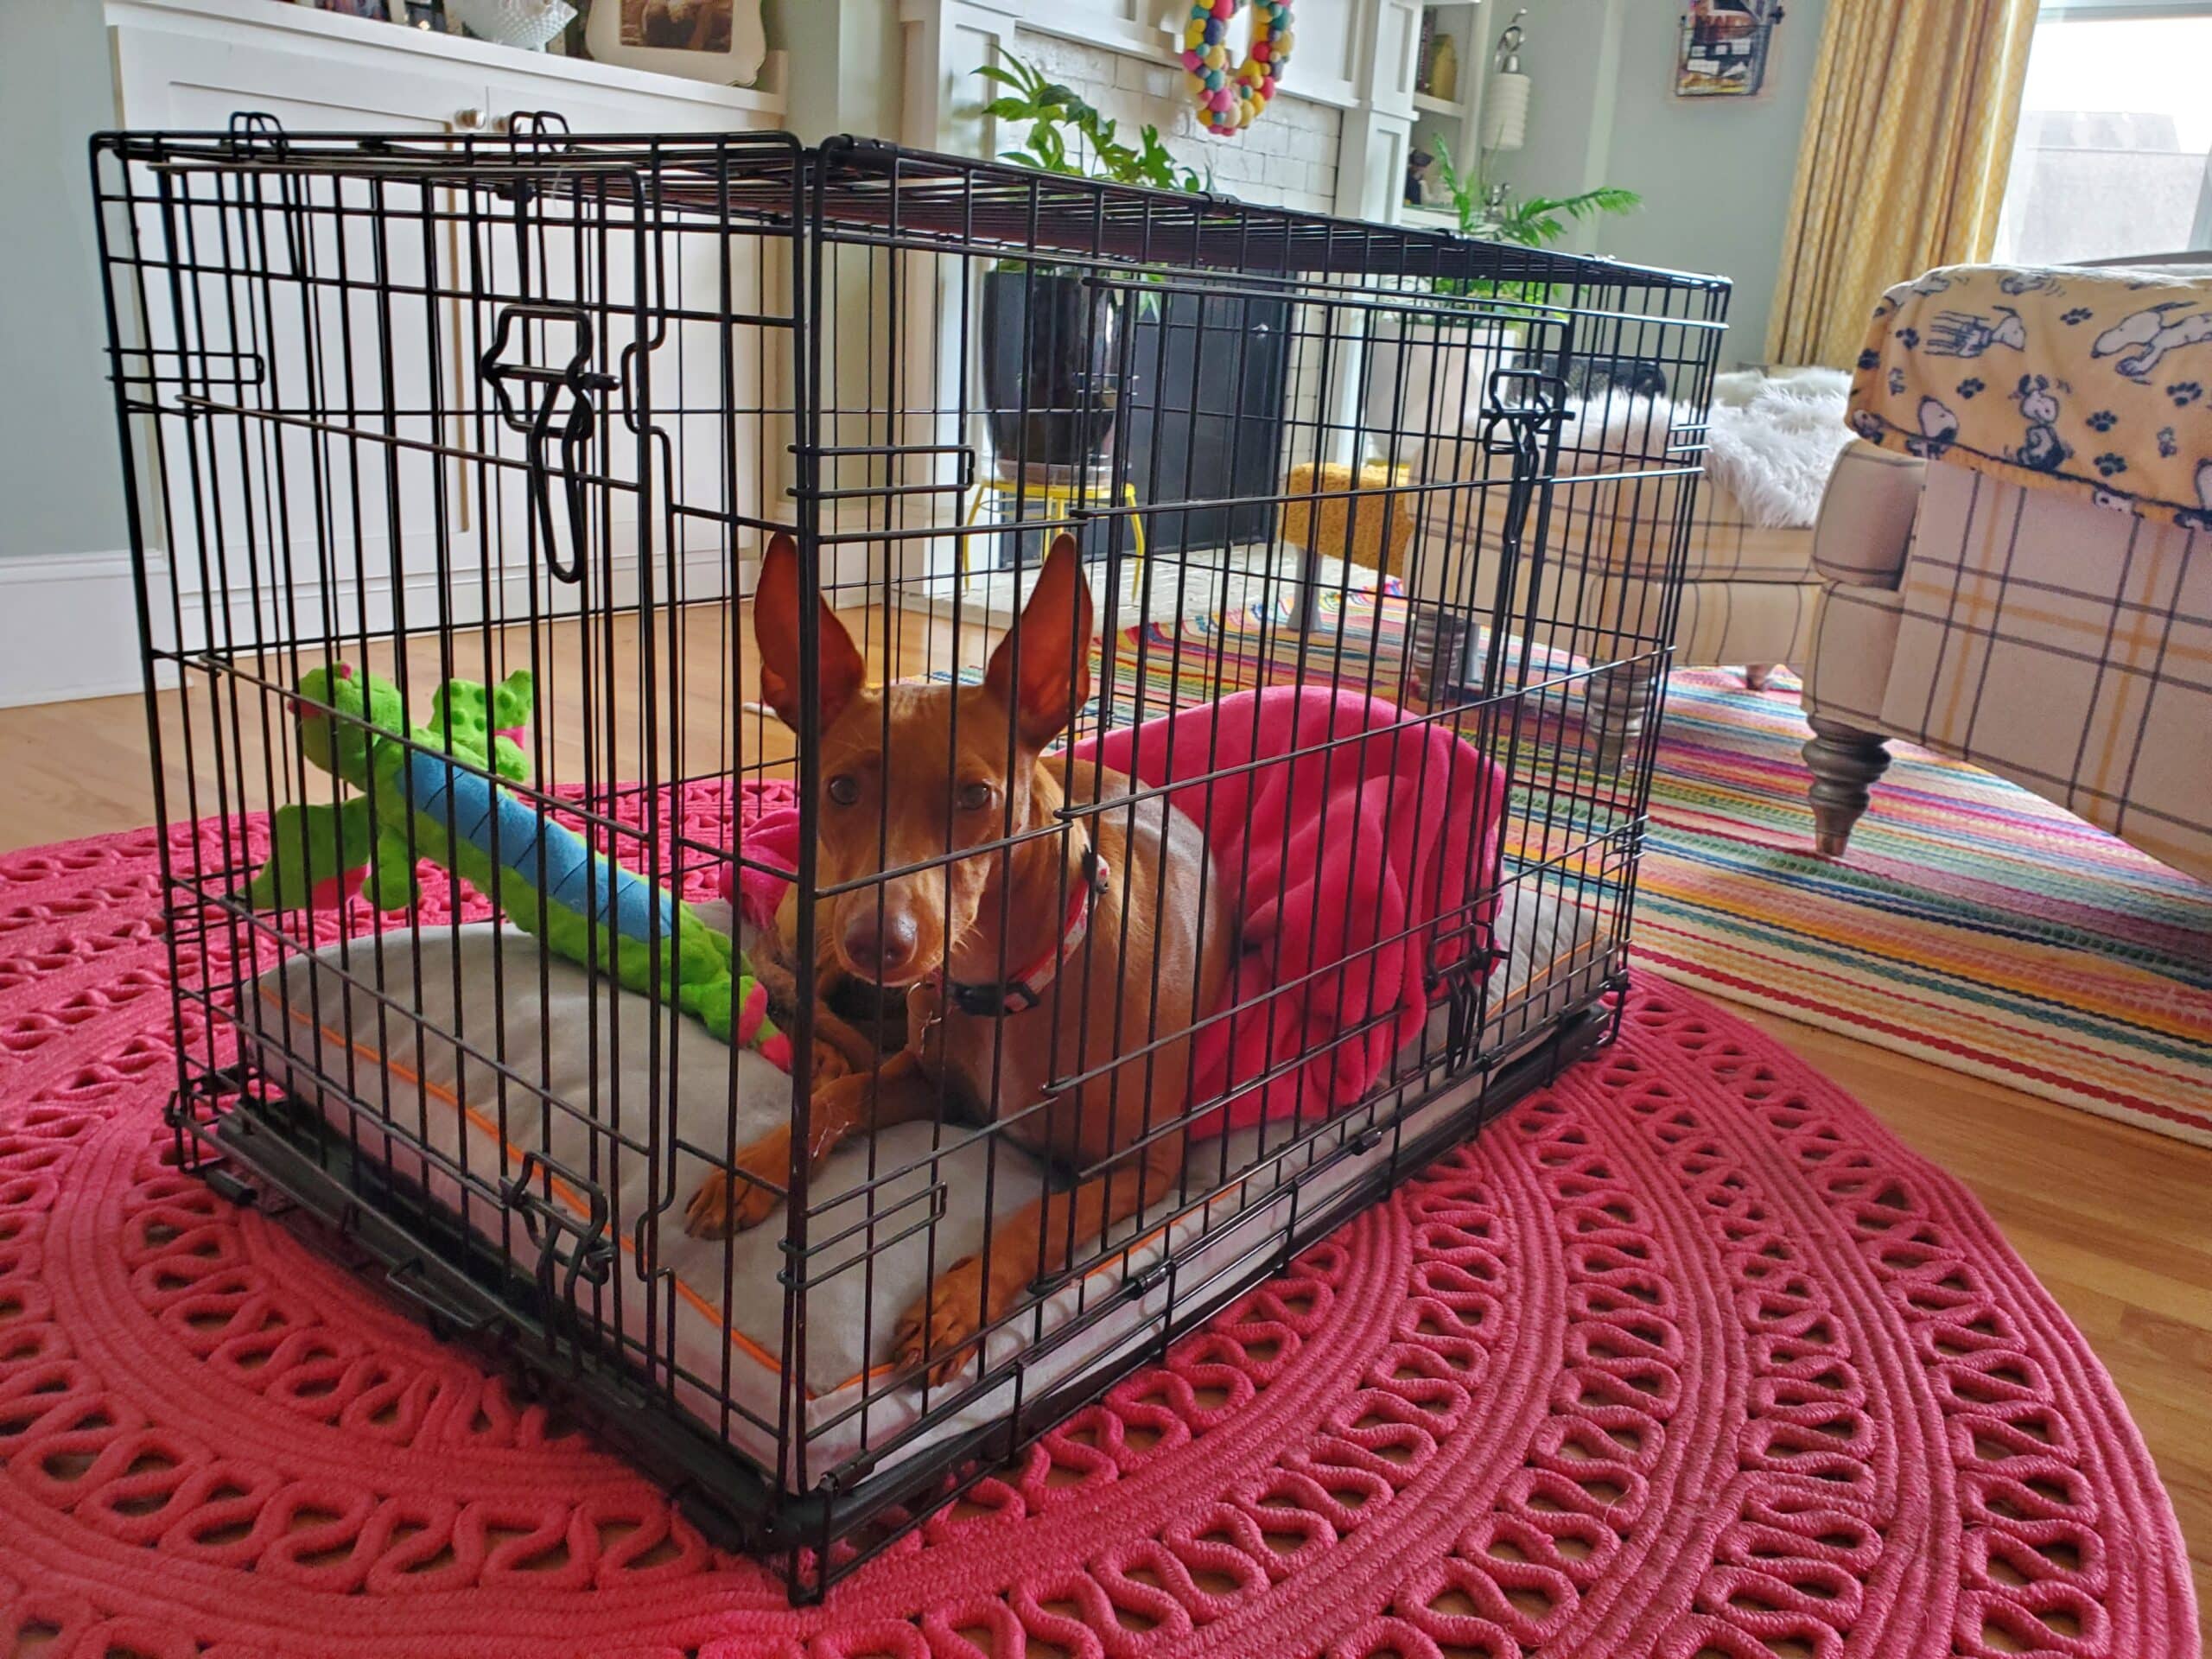 Dog sitting in kennel crate